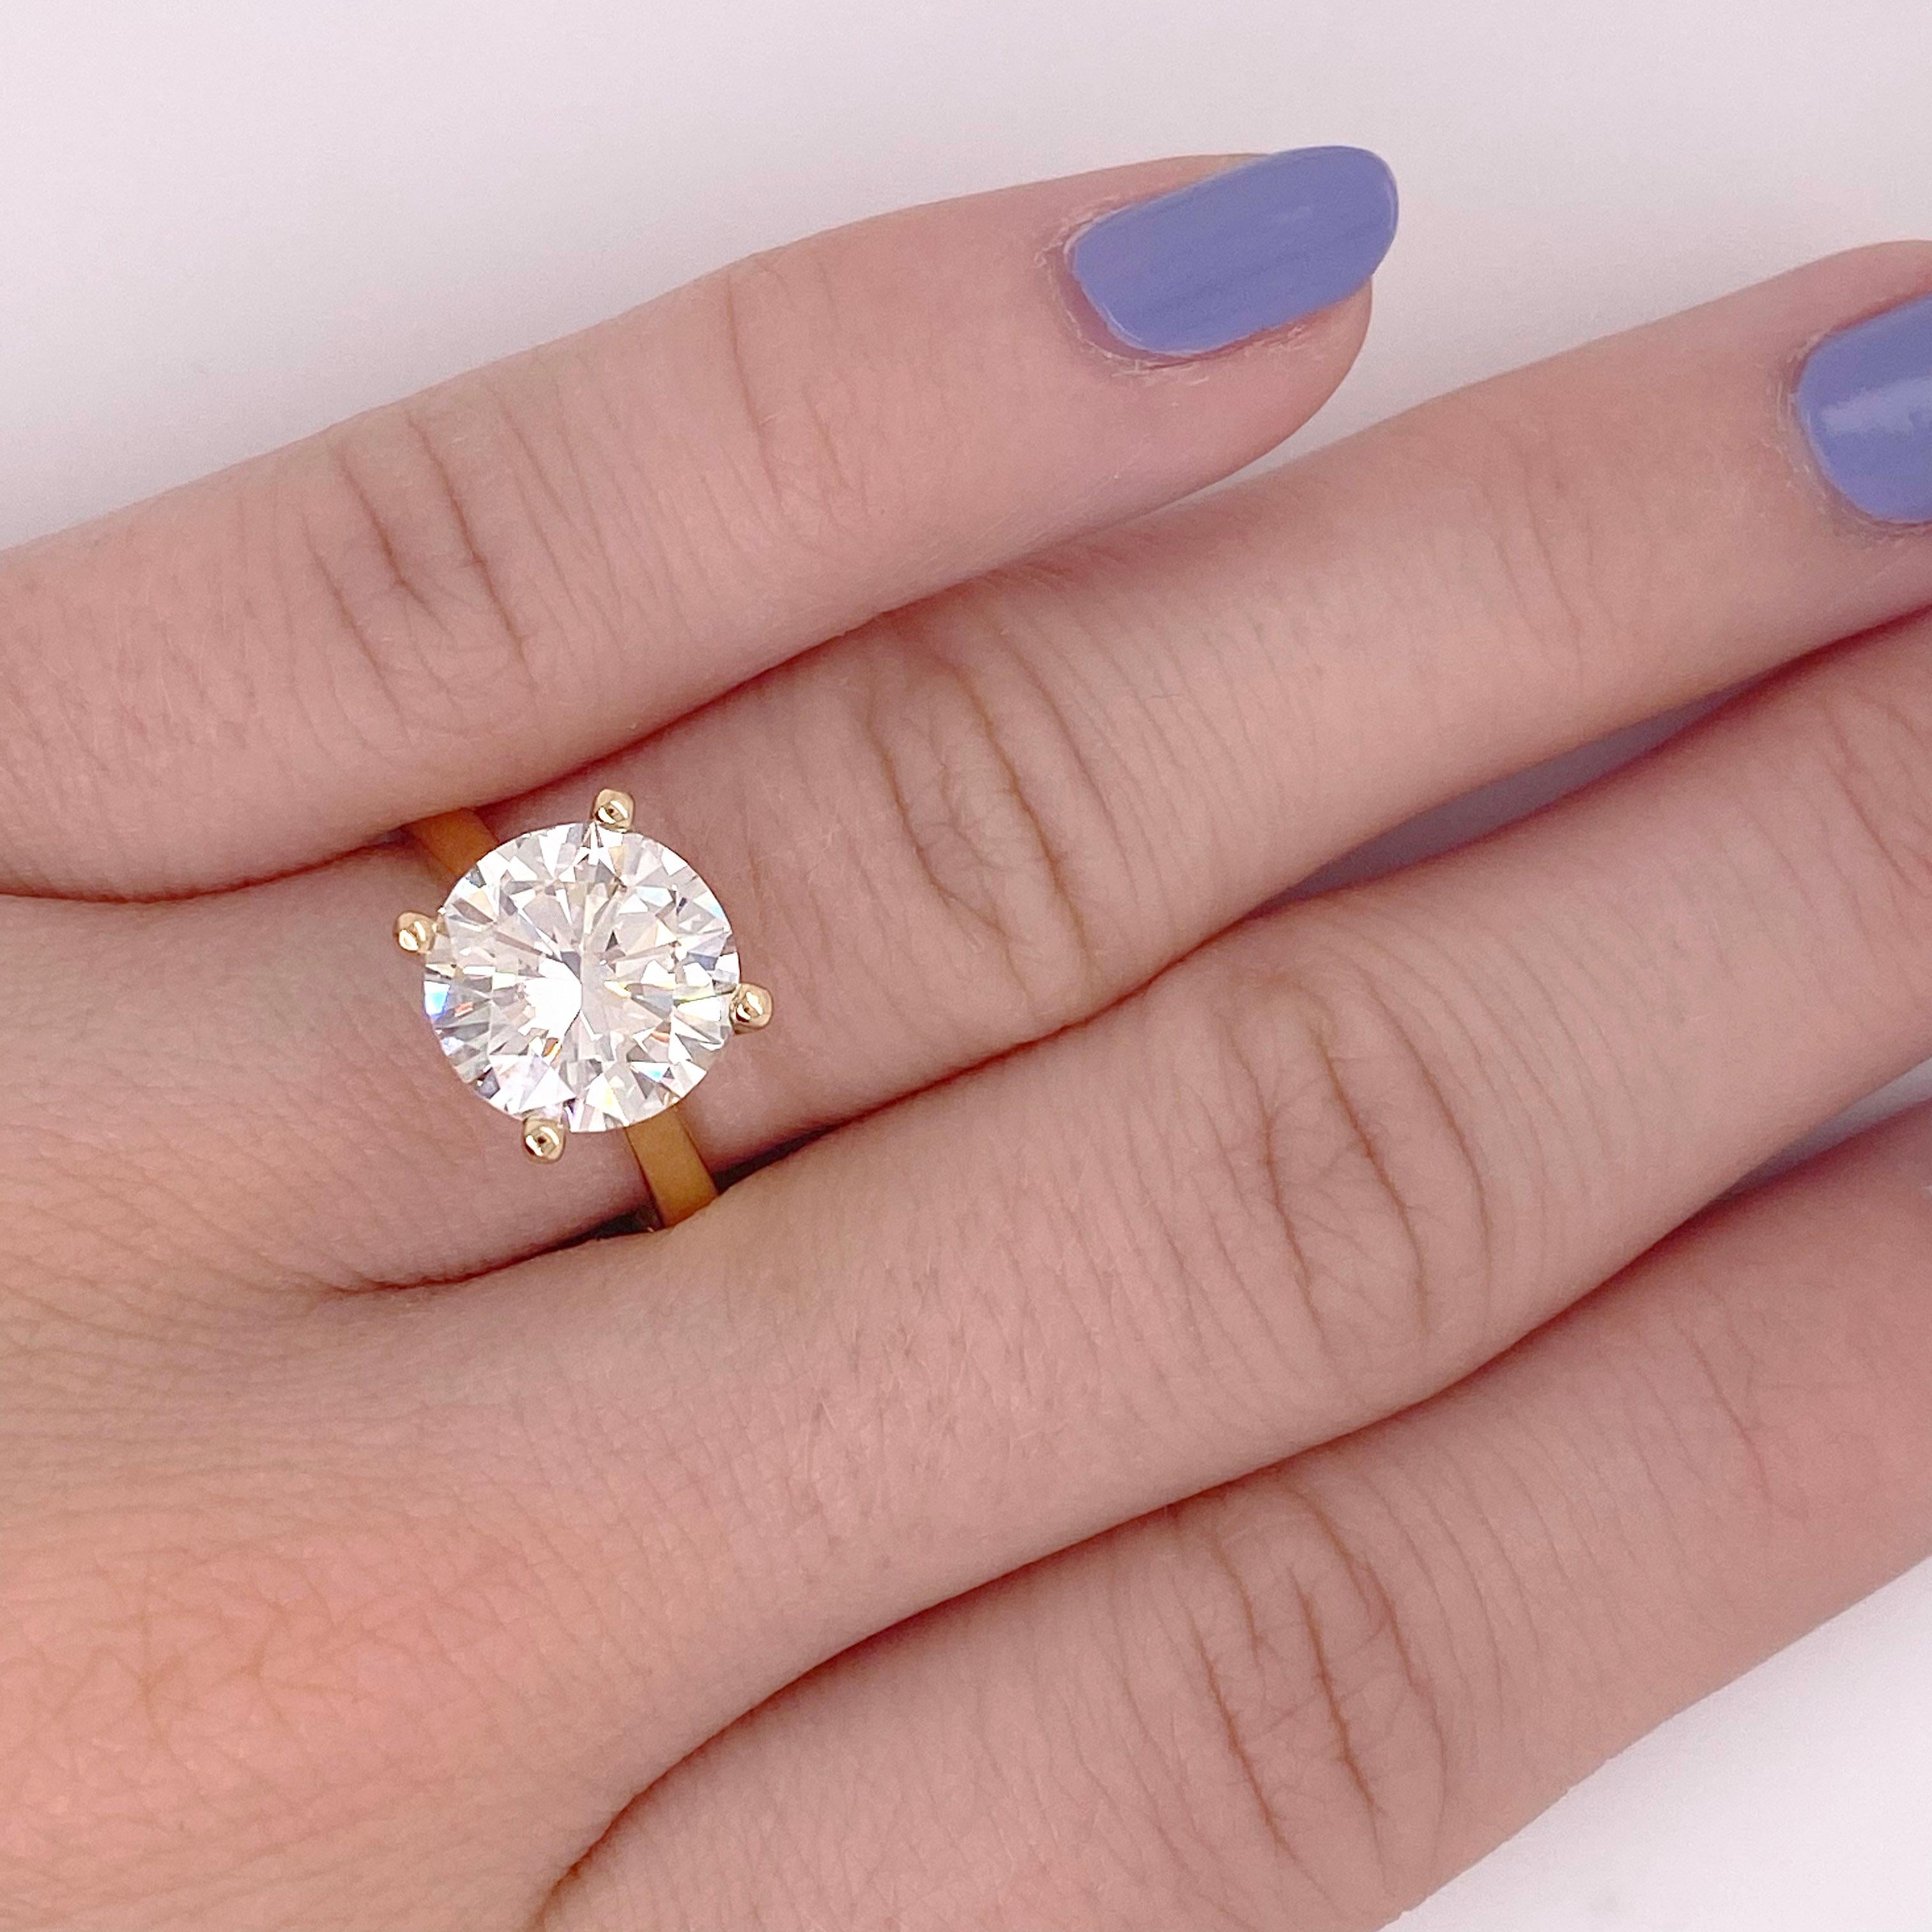 This is the diamond ring of every girl’s dream! An elegant ring setting to match a show-stopping center stone. Because the setting is so beautifully simple you can partner it with any wedding band or change it up every day to fit your style for the